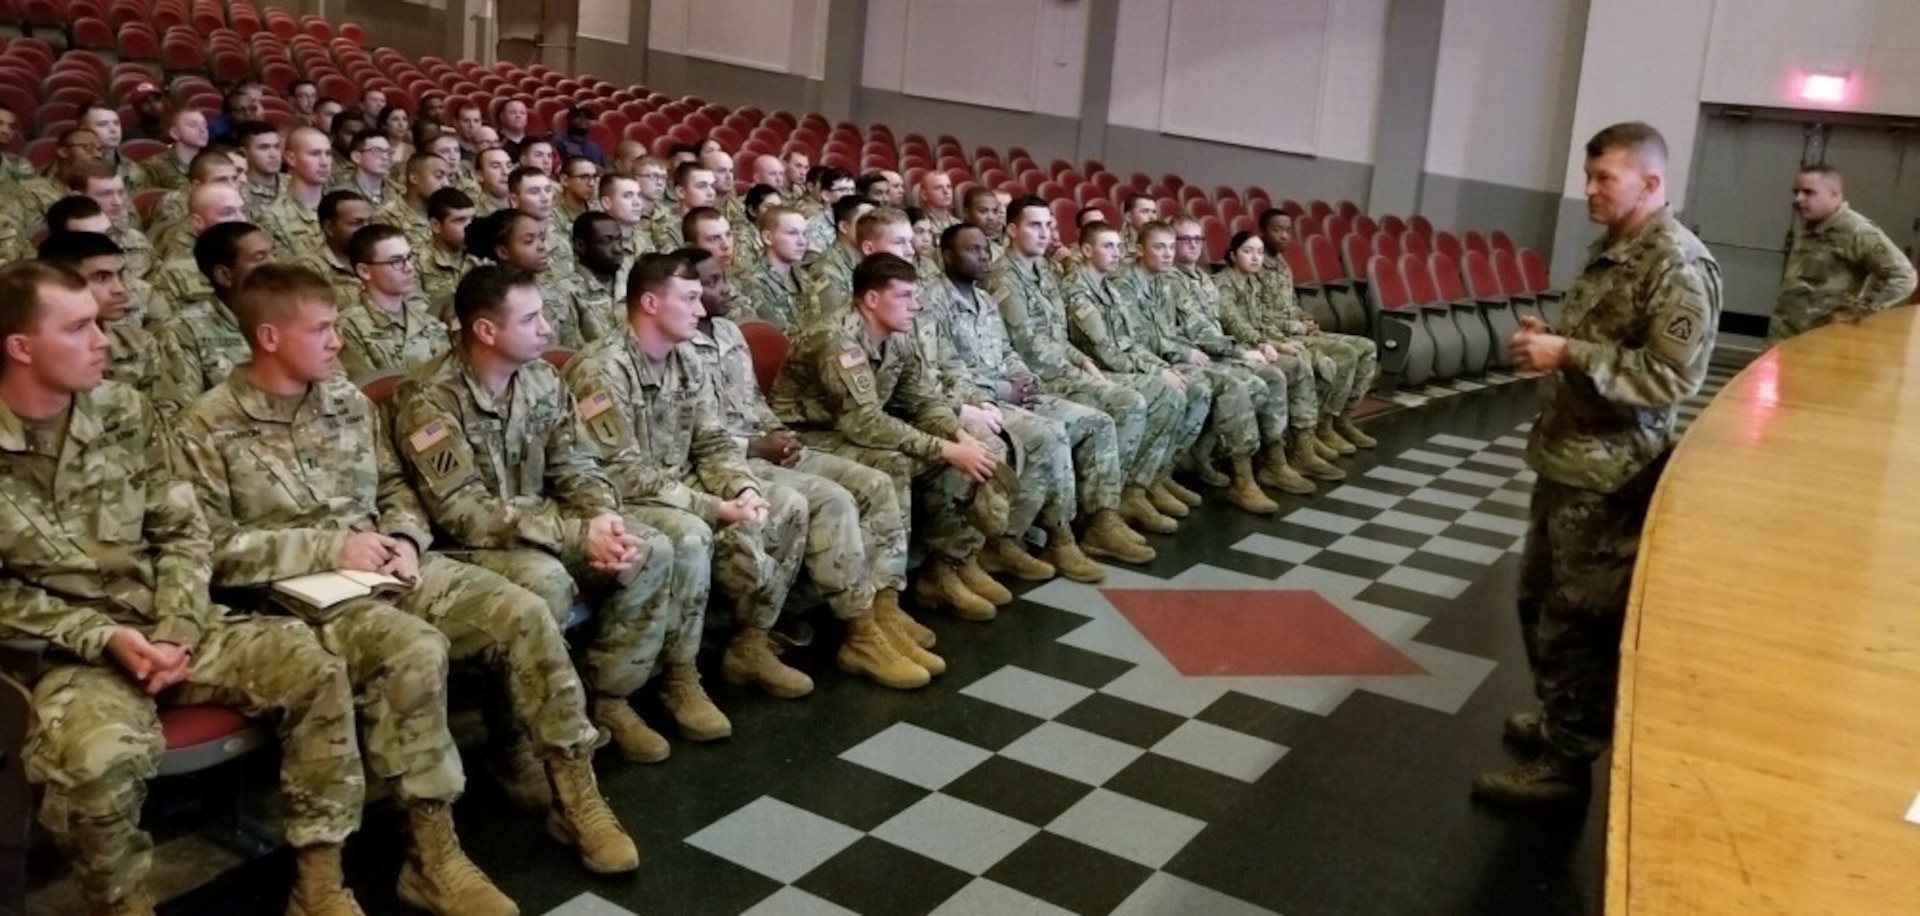 Army Lt. Gen. Jeffrey Buchanan, U.S. Army North (Fifth Army) commanding general, briefs newly arrived Soldiers from 4th Infantry Division, Fort Carson, Colo., and Fort Knox at Joint Base San Antonio-Lackland Oct. 31. The Soldiers are in Texas in support of Operation Faithful Patriot, which is a Department of Defense operation in support of the Department of Homeland Security and, Customs and Border Patrol in order to provide national security at the nation’s southern border.